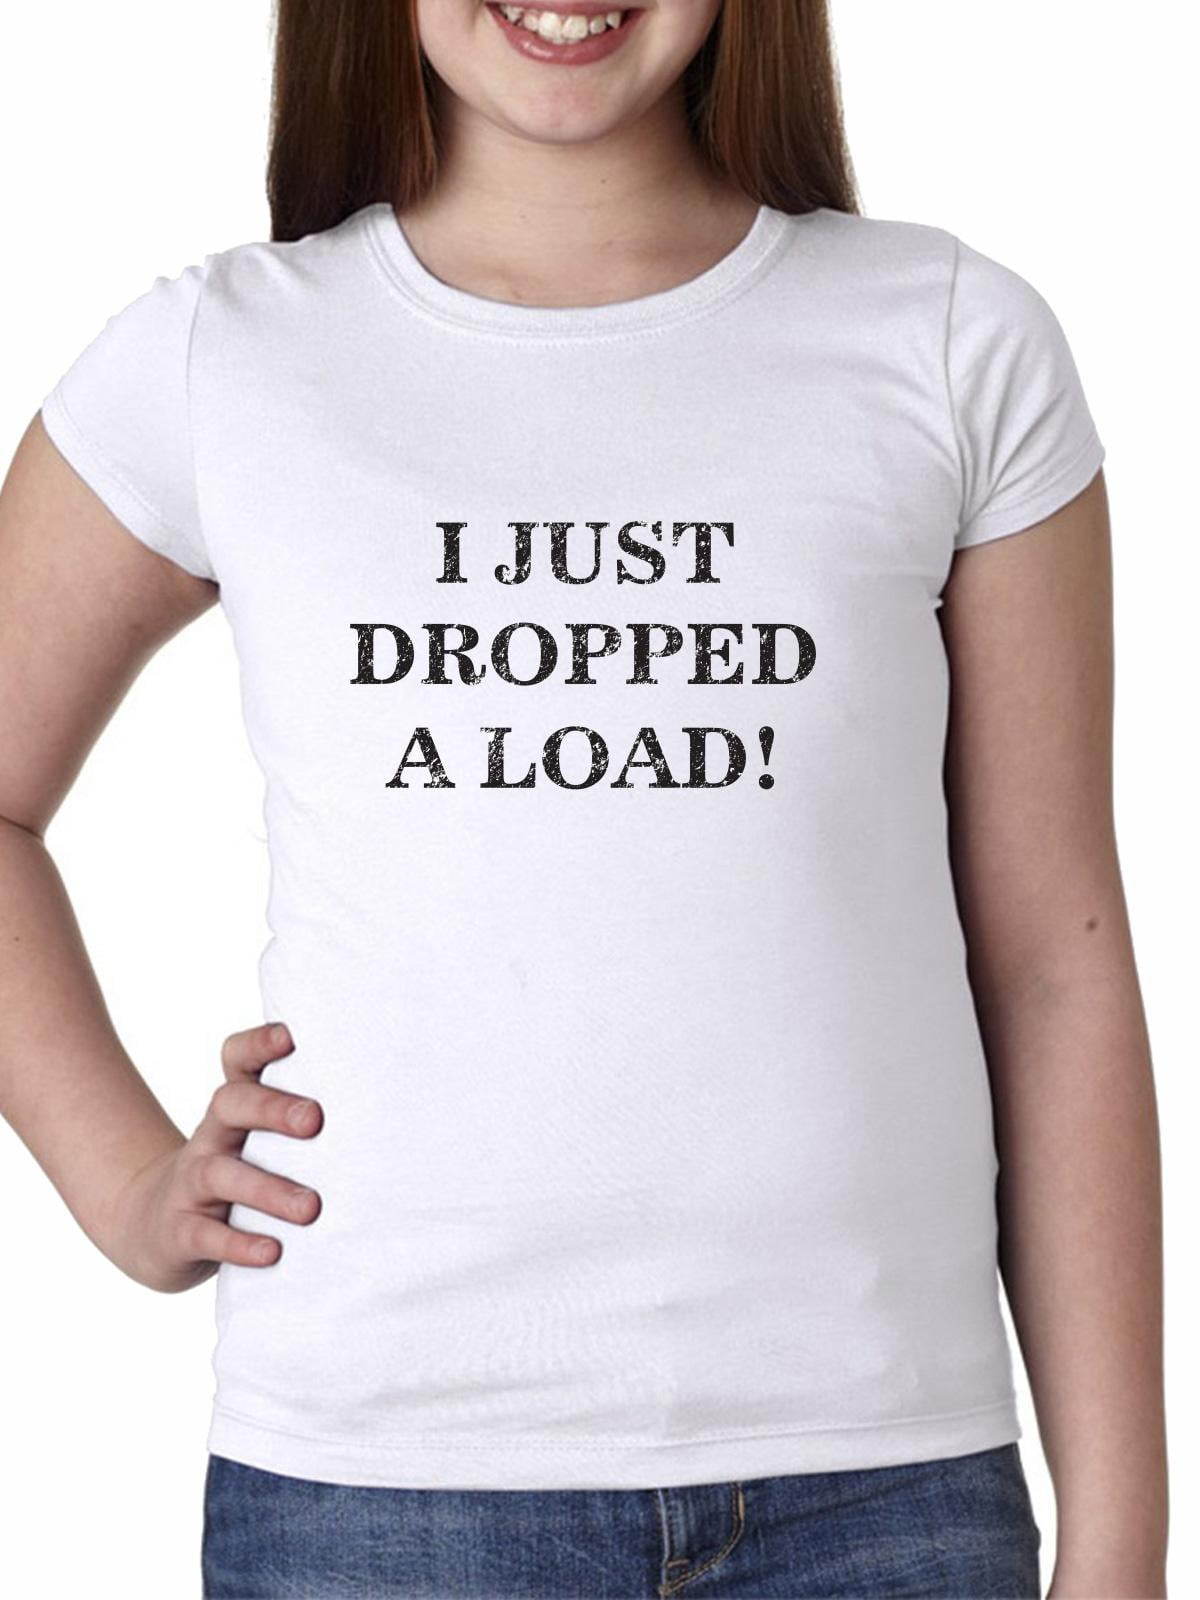 I Just Dropped A Load! Girl's Cotton Youth T-Shirt - Walmart.com